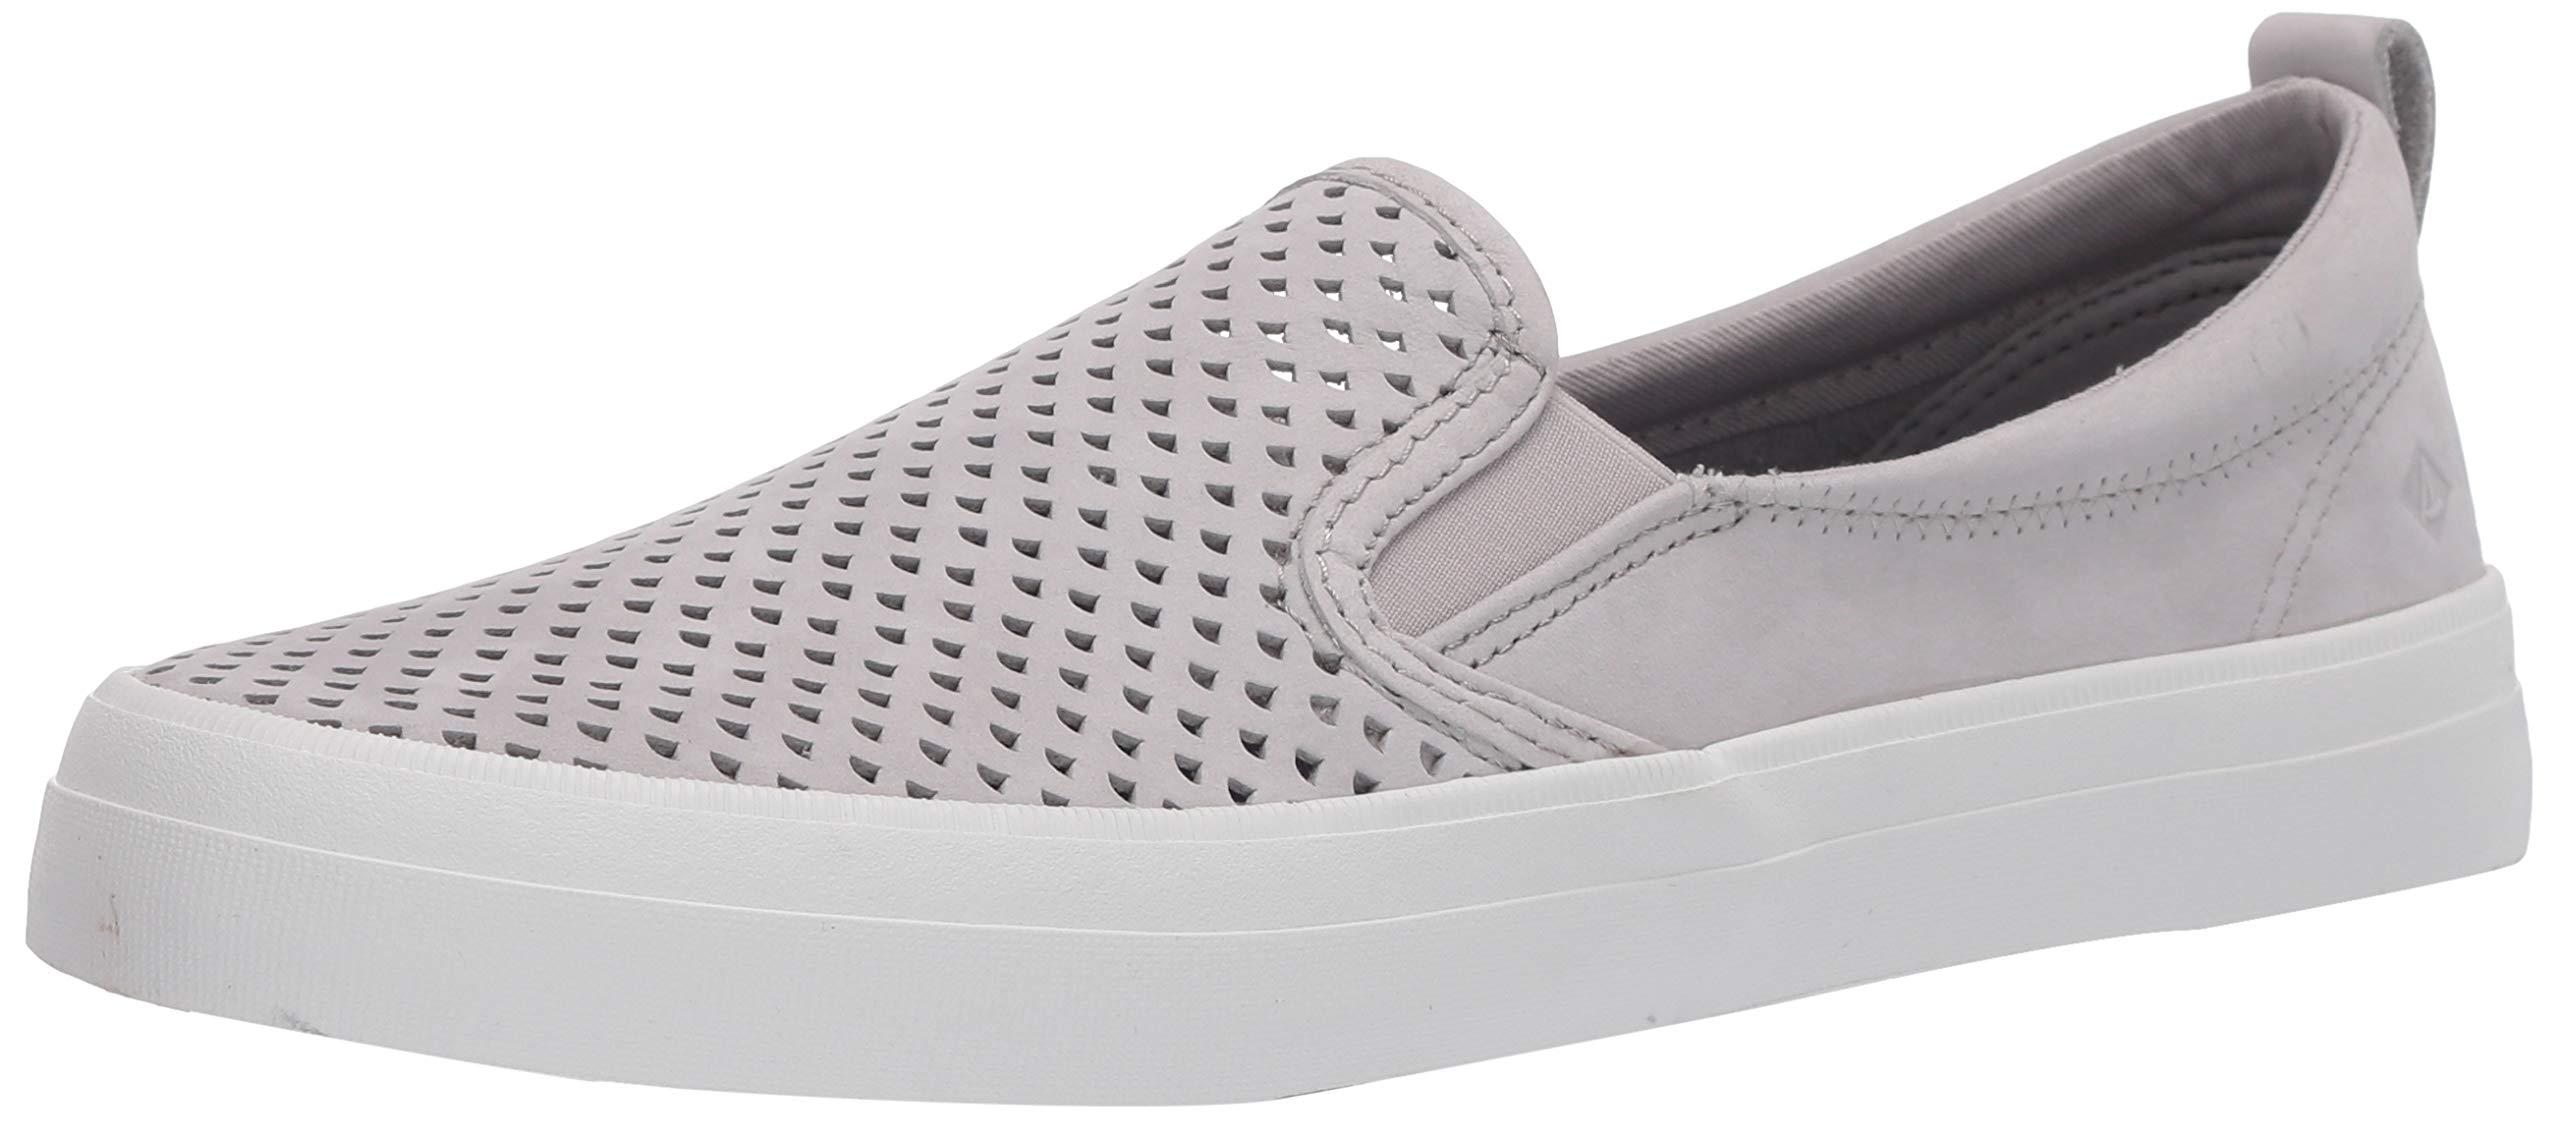 Sperry Top-Sider Leather Crest Twin Gore Scalloped Perf Sneaker in Grey ...